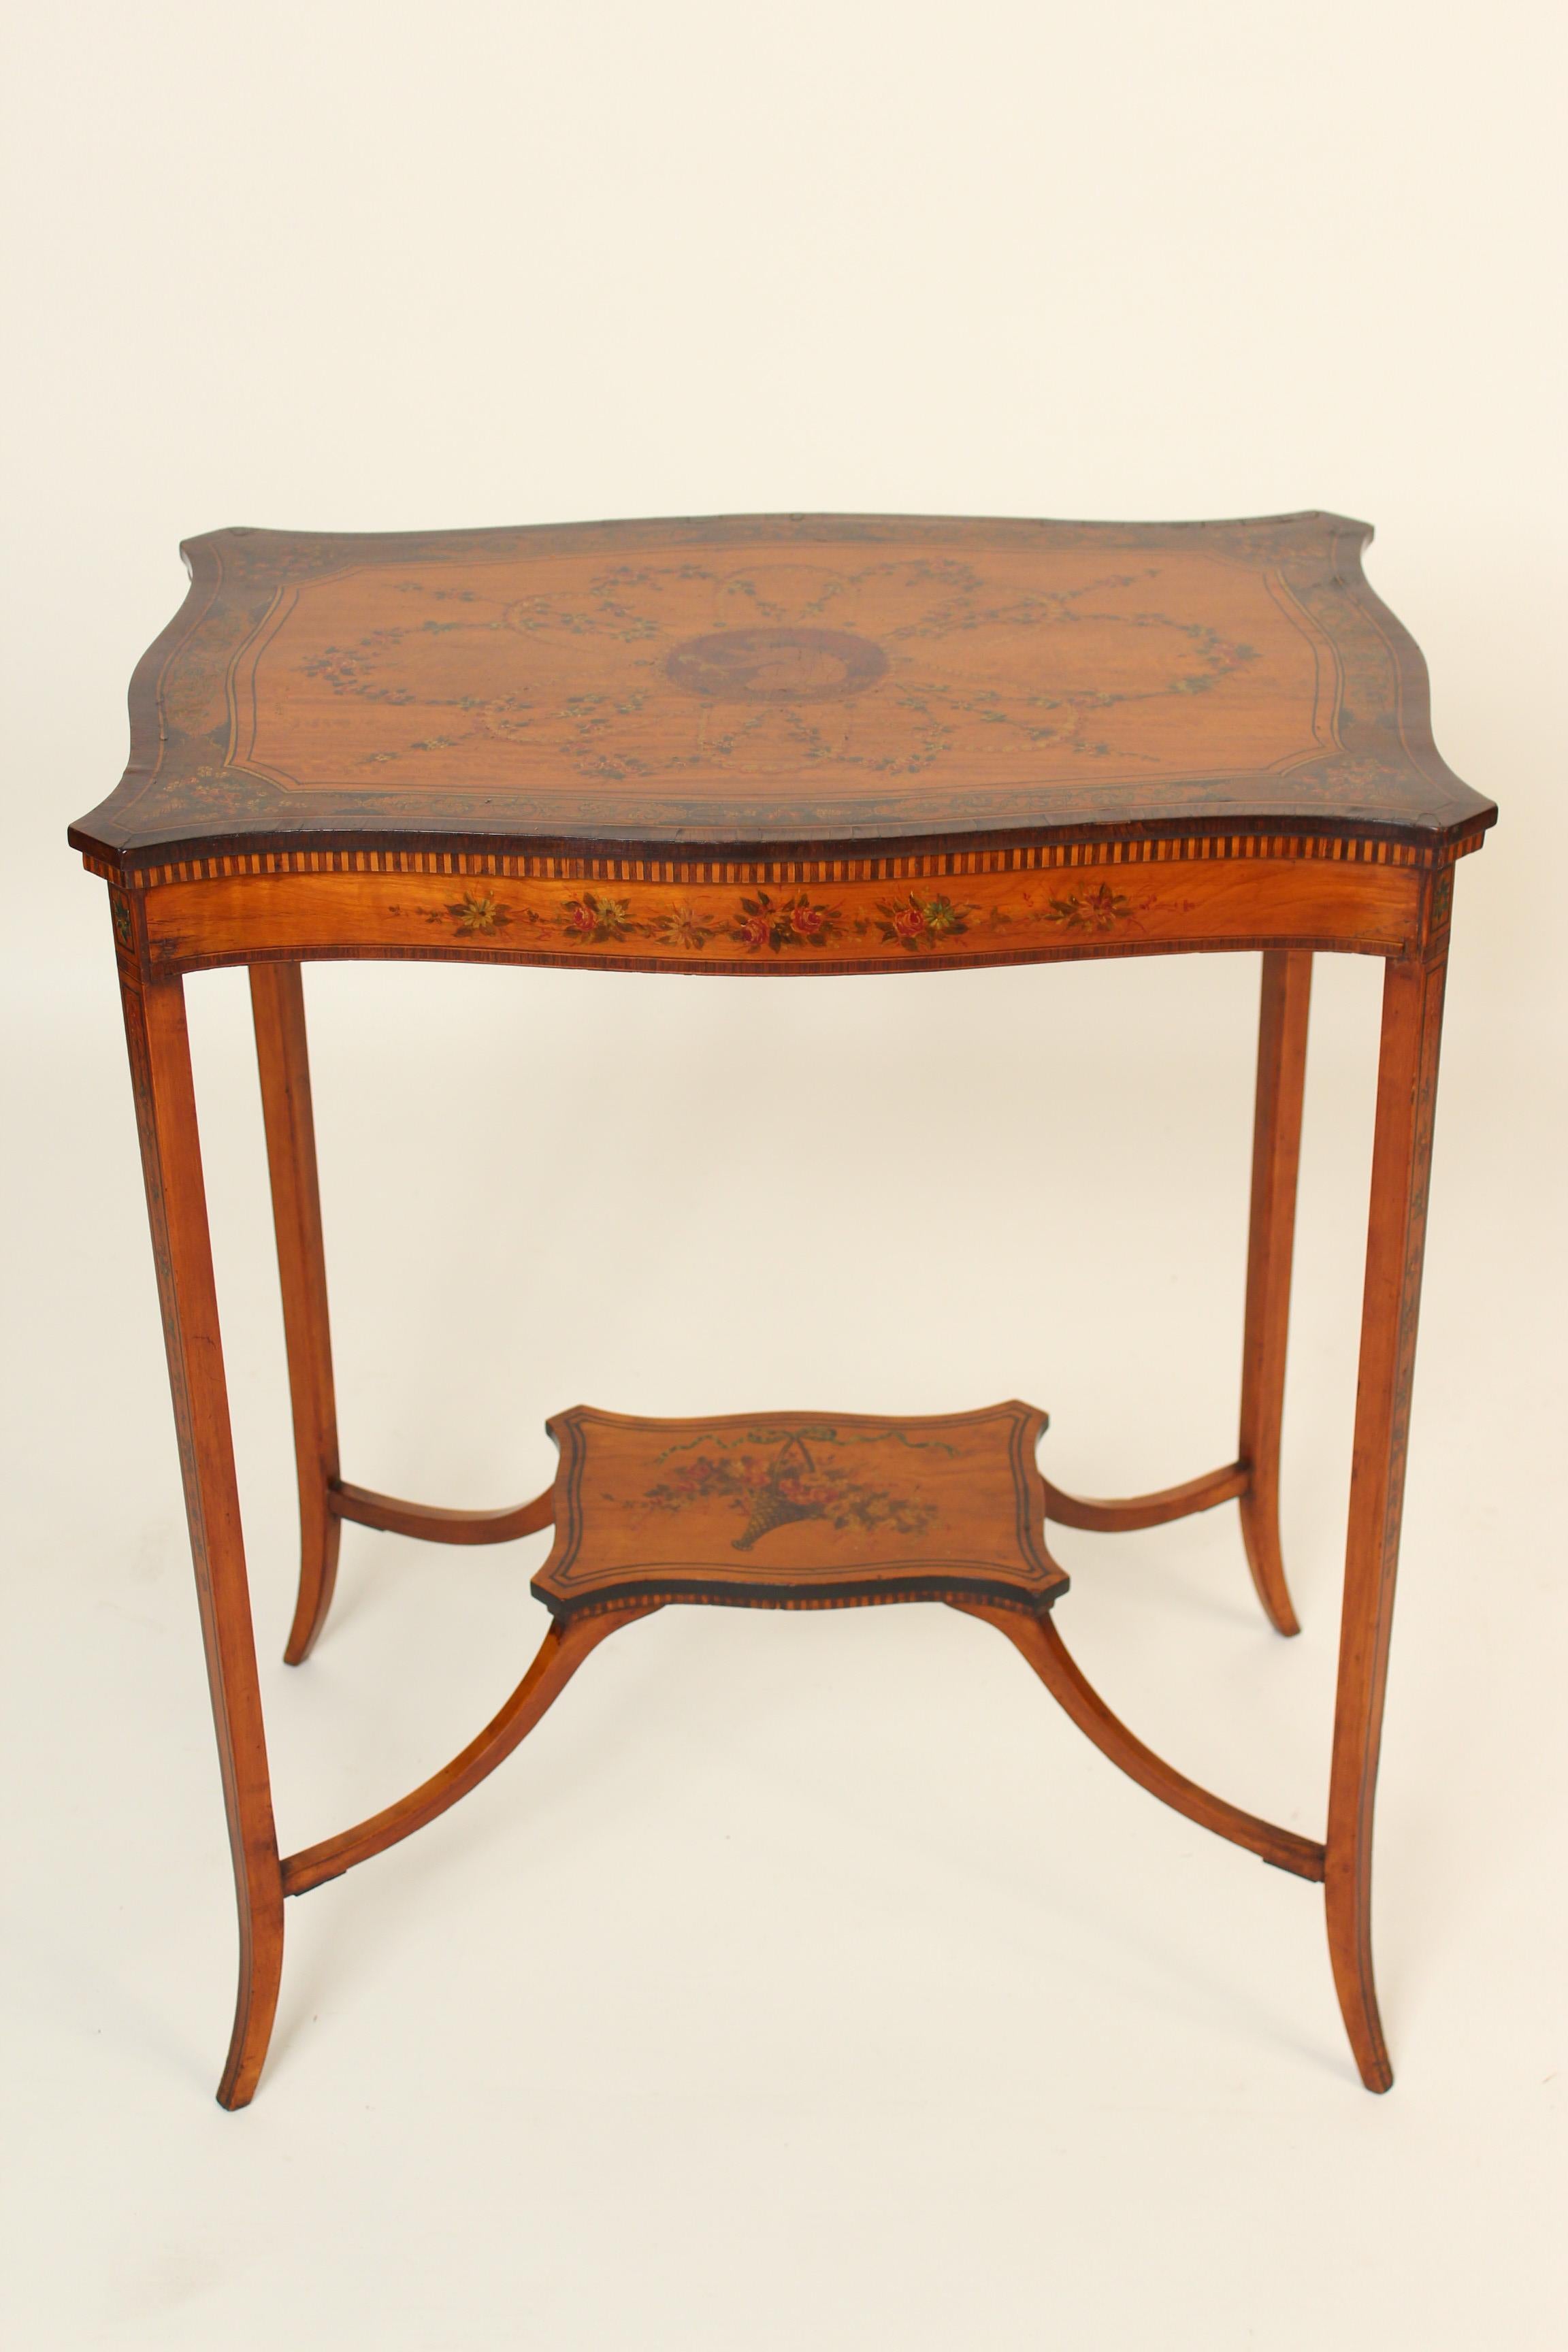 English Edwardian painted satinwood occasional table with rosewood crossbanding, circa 1920.